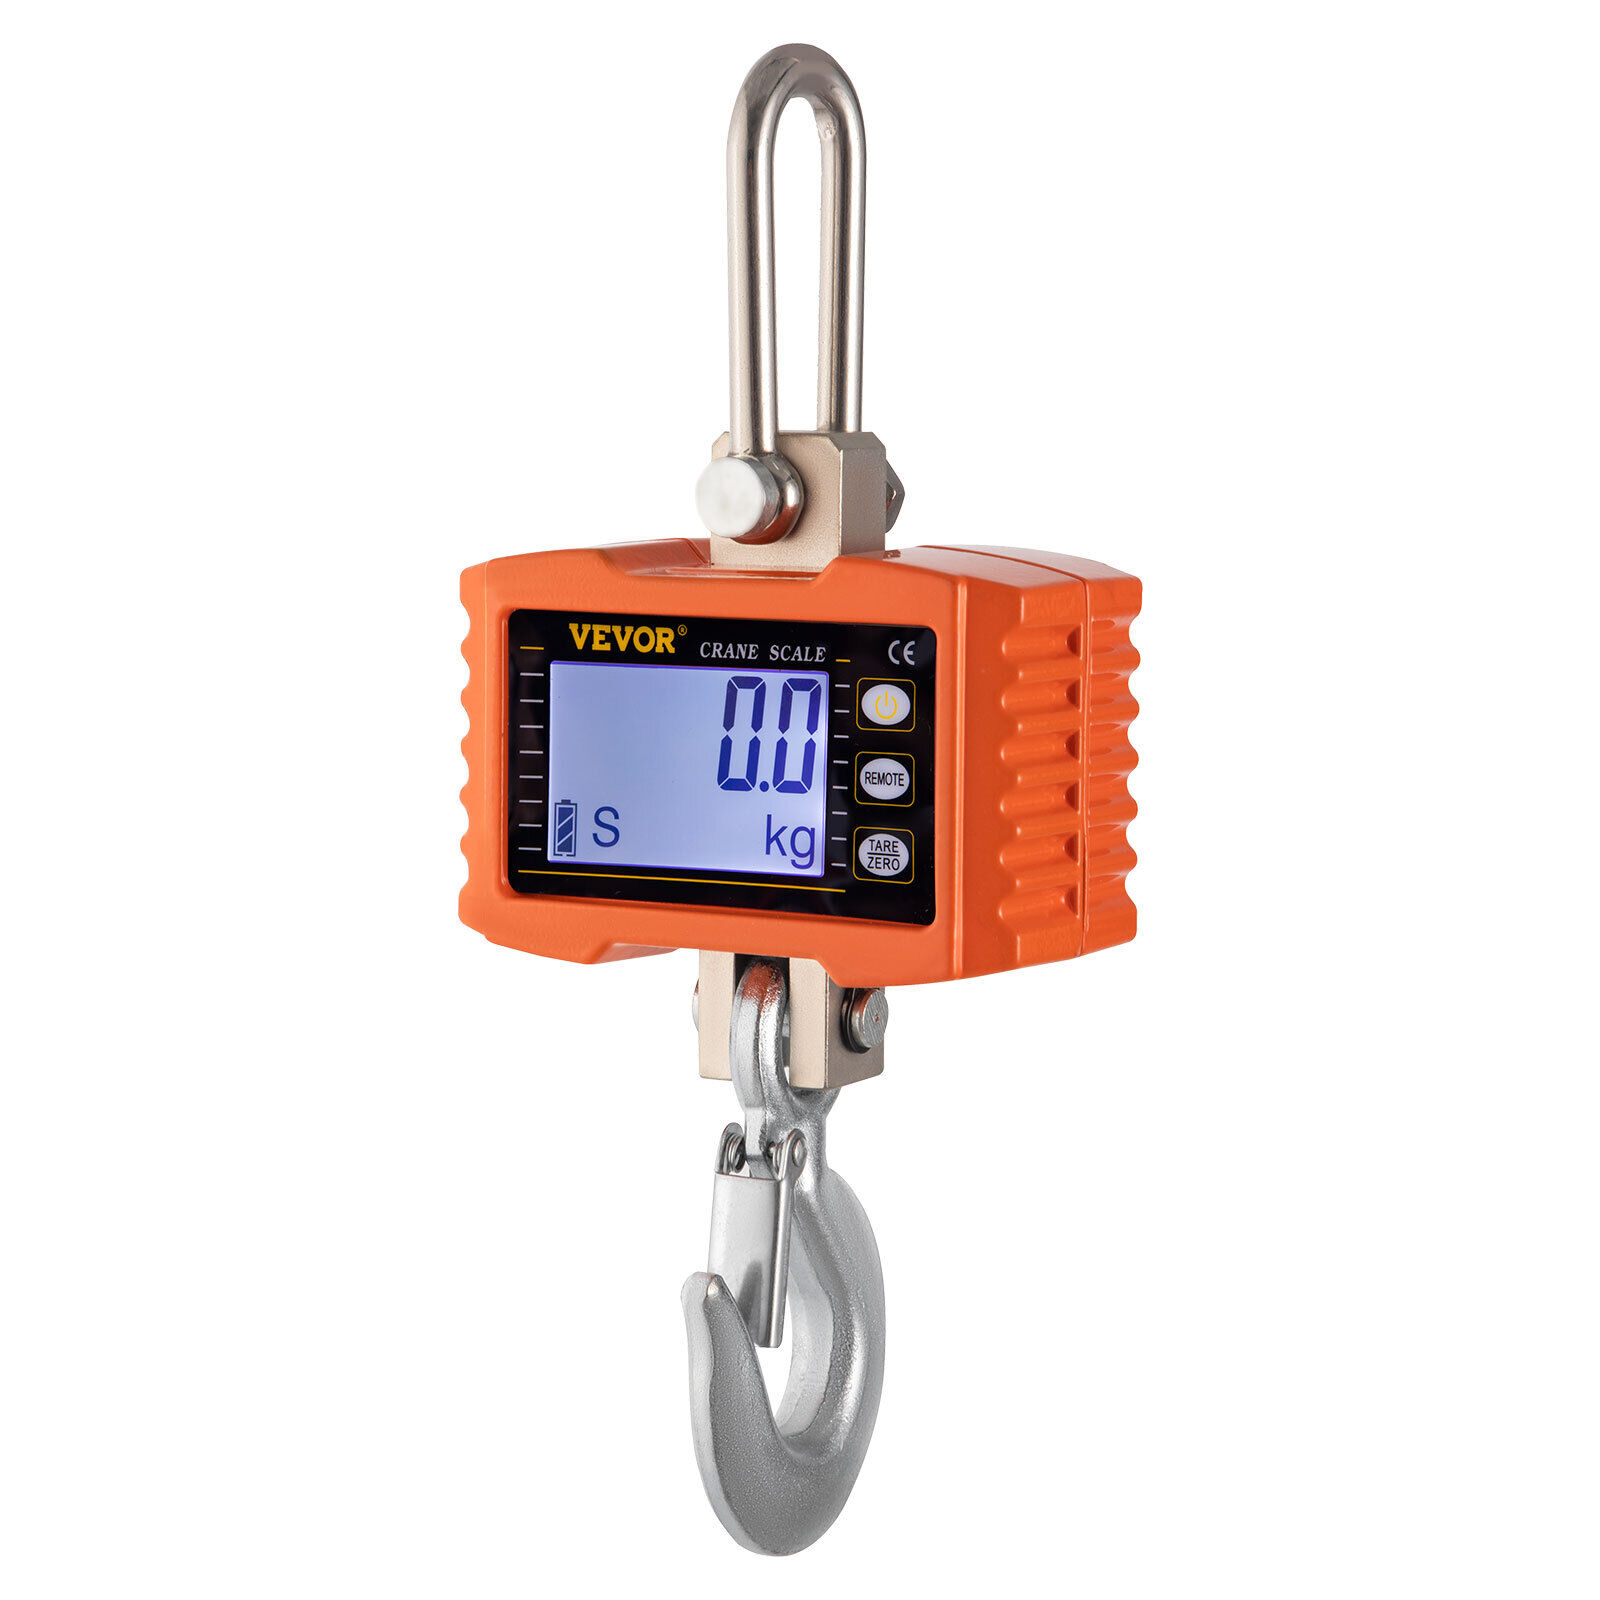 VEVOR 2200LBS/1000KG Hanging Scale LED Digital Industrial Heavy Duty Crane Scale